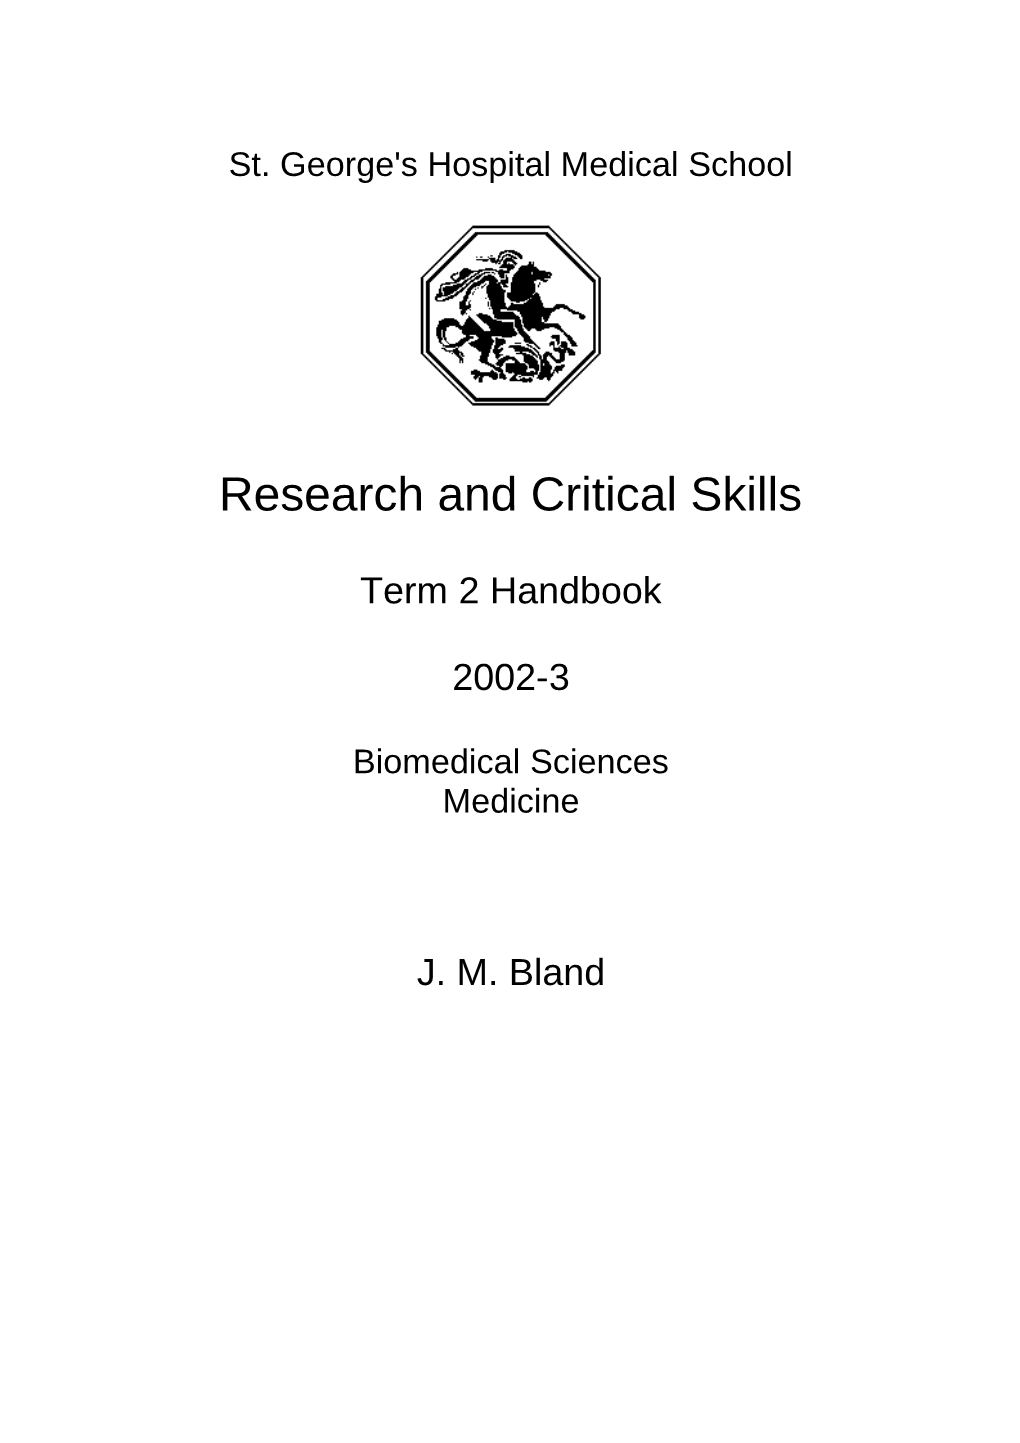 Research and Critical Skills, 1999-2000